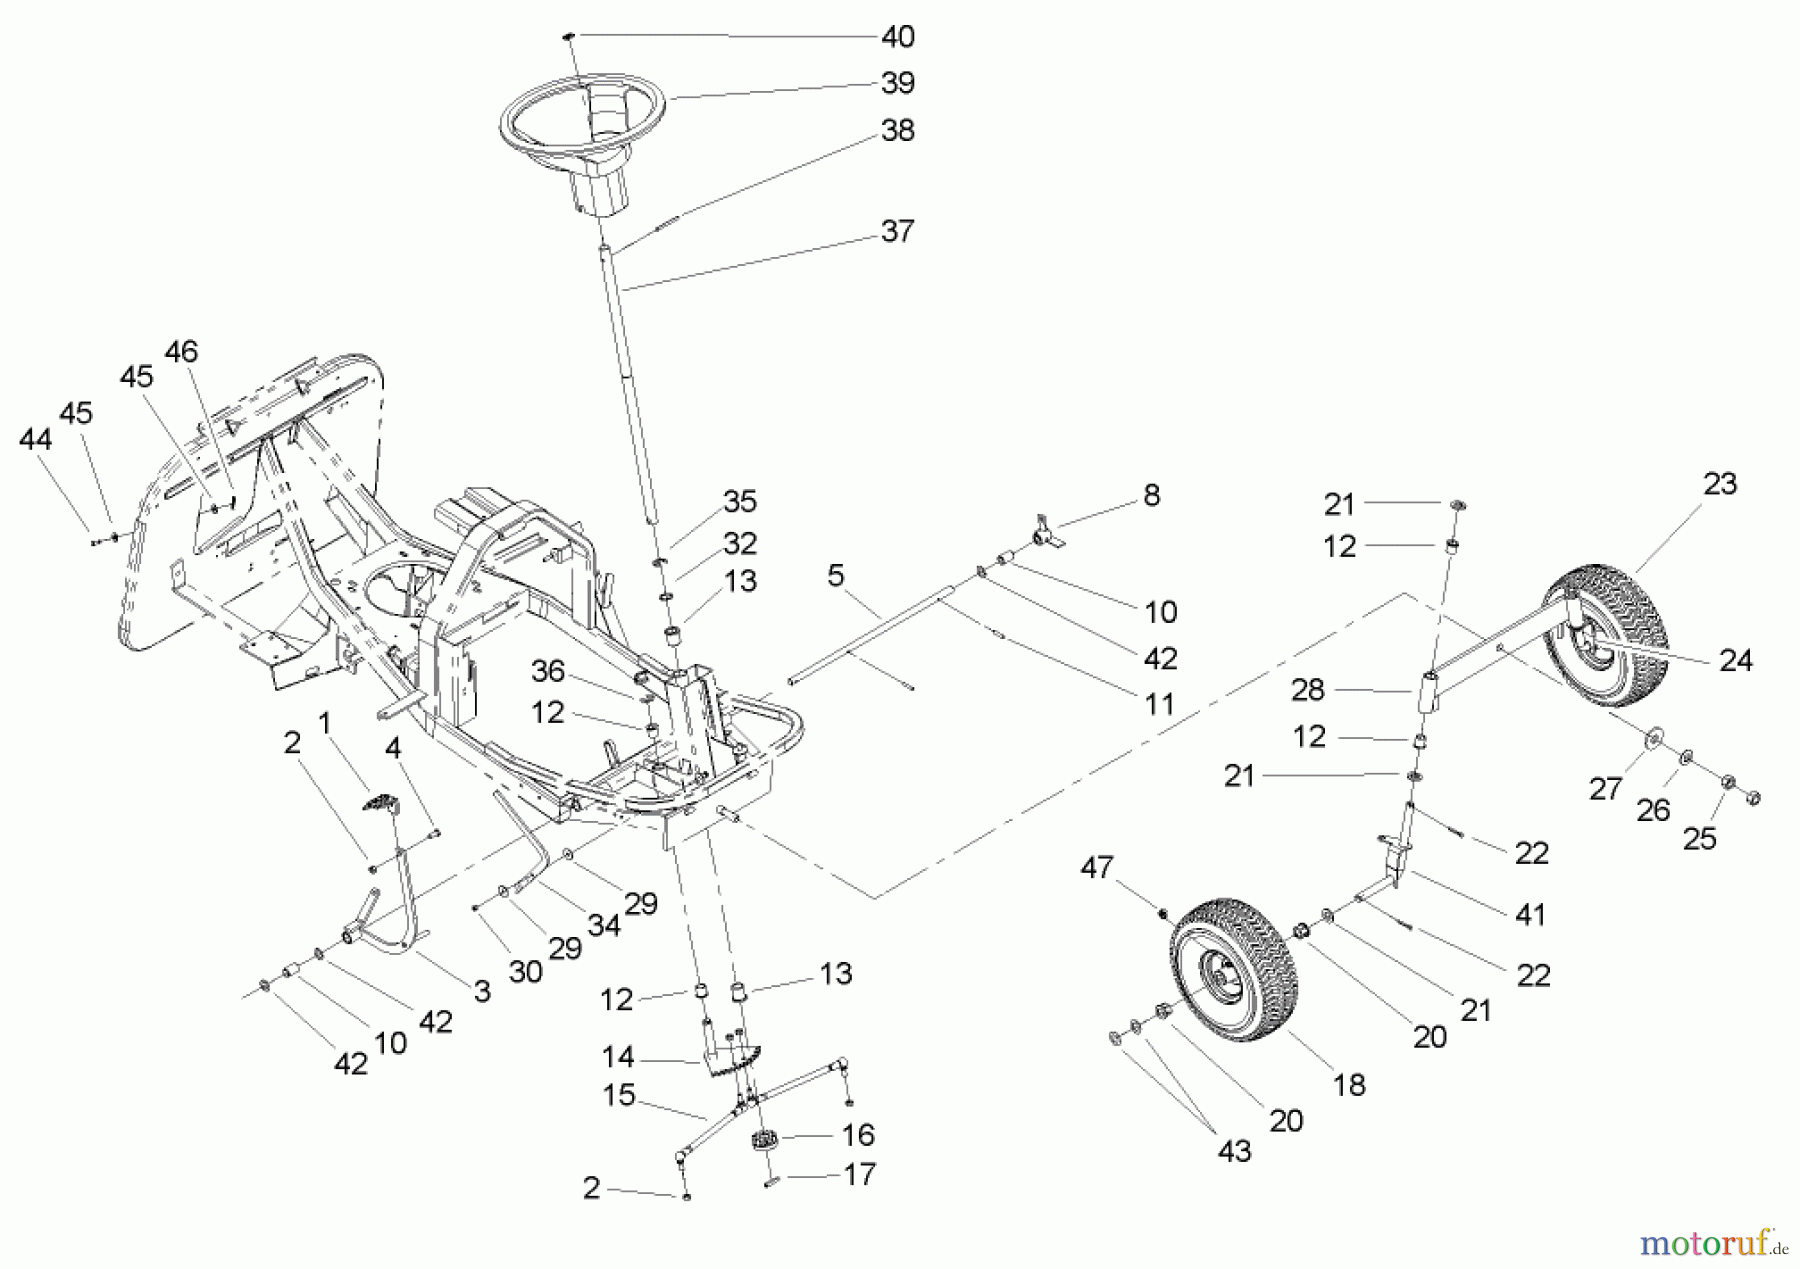  Toro Neu Mowers, Rear-Engine Rider 70185 (13-32G) - Toro 13-32G Rear-Engine Riding Mower, 2004 (240000001-240999999) FRONT AXLE AND STEERING ASSEMBLY